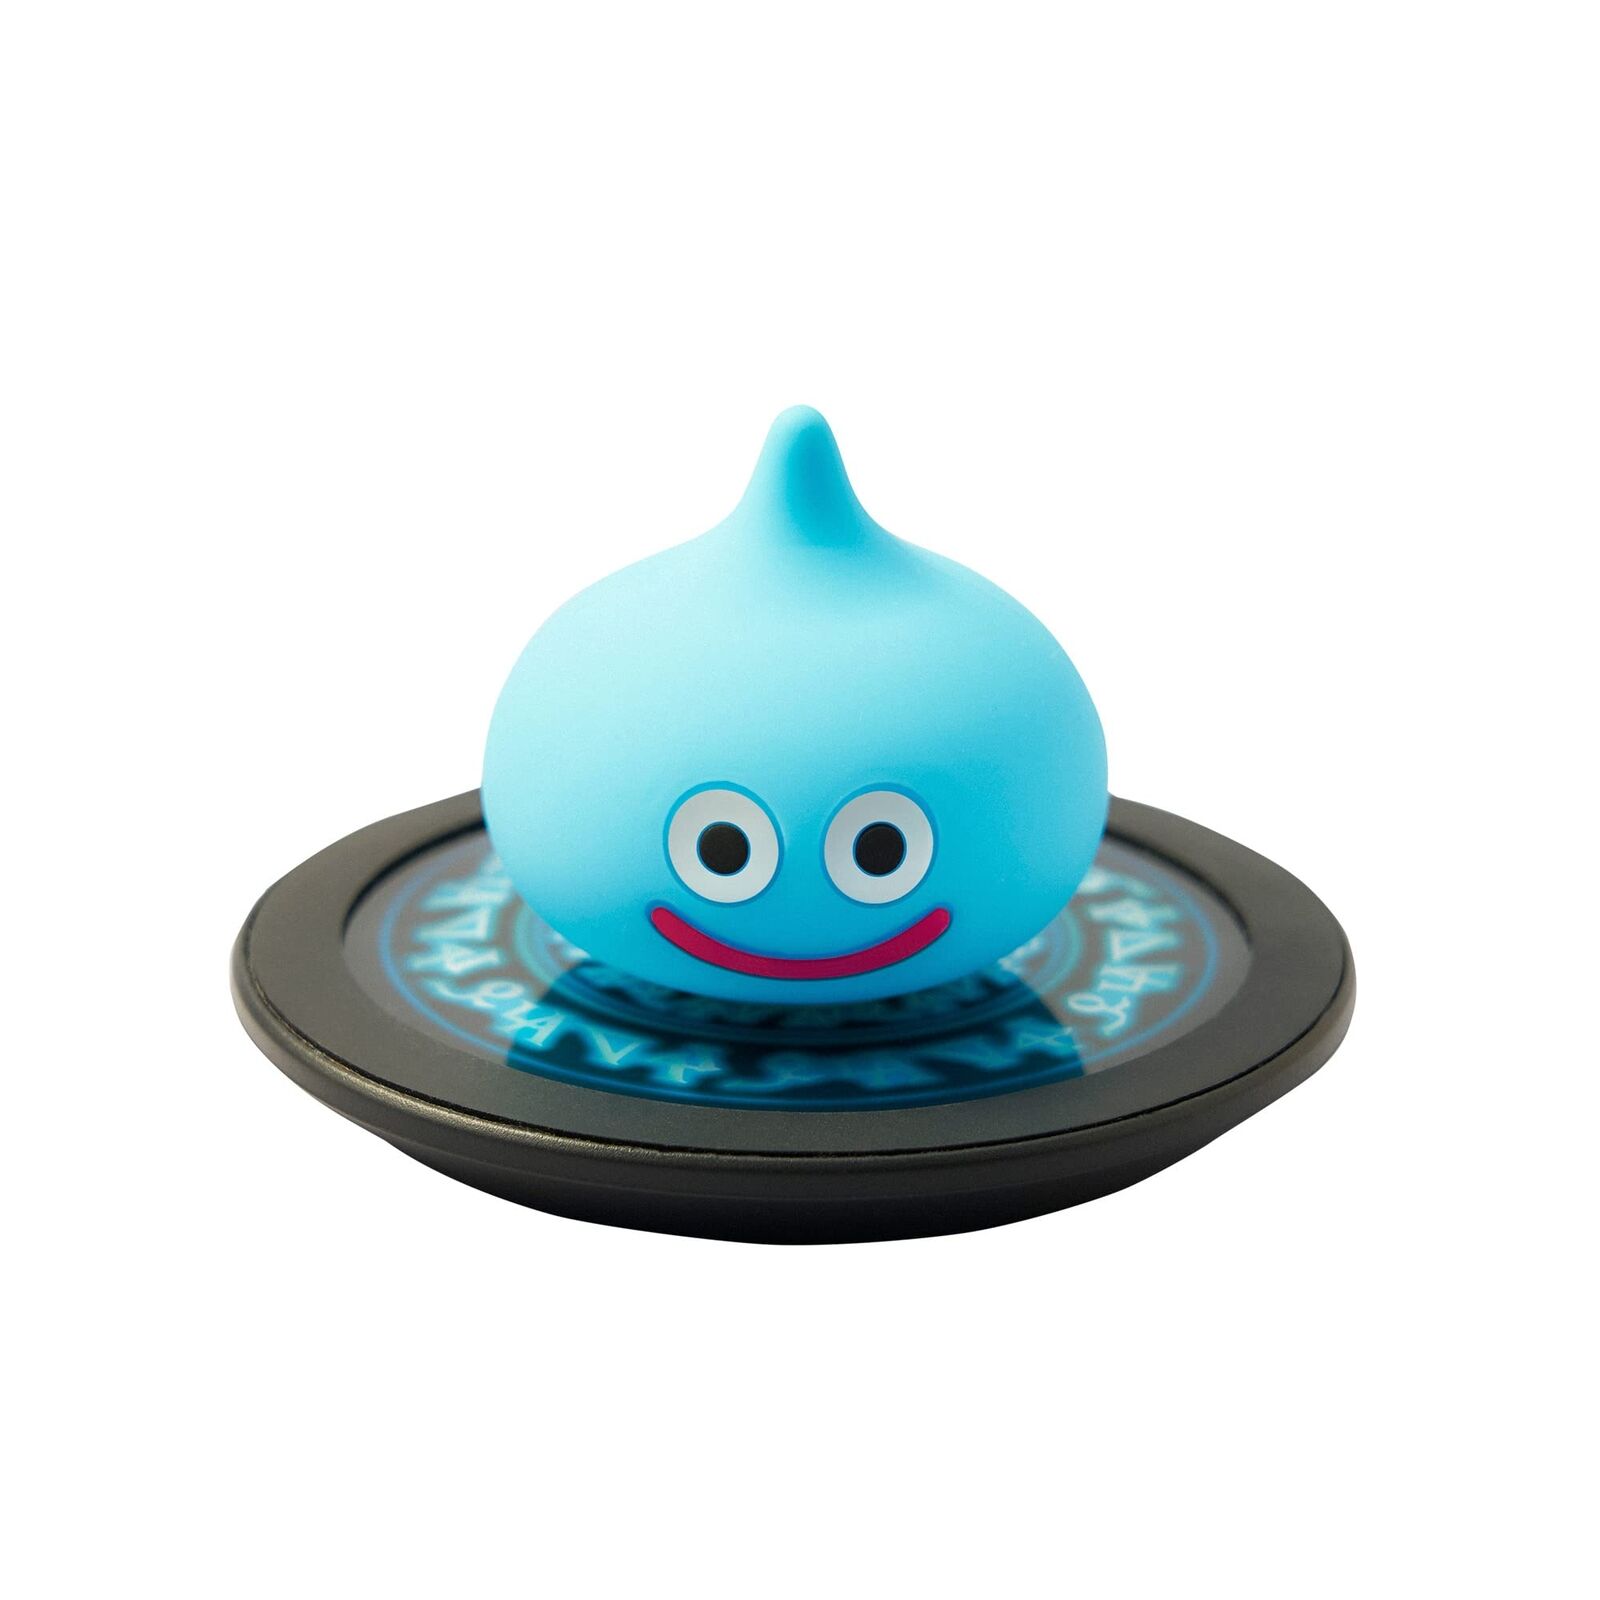 DQ Dragon Quest X online wireless charging pad Zing (with slime figure)